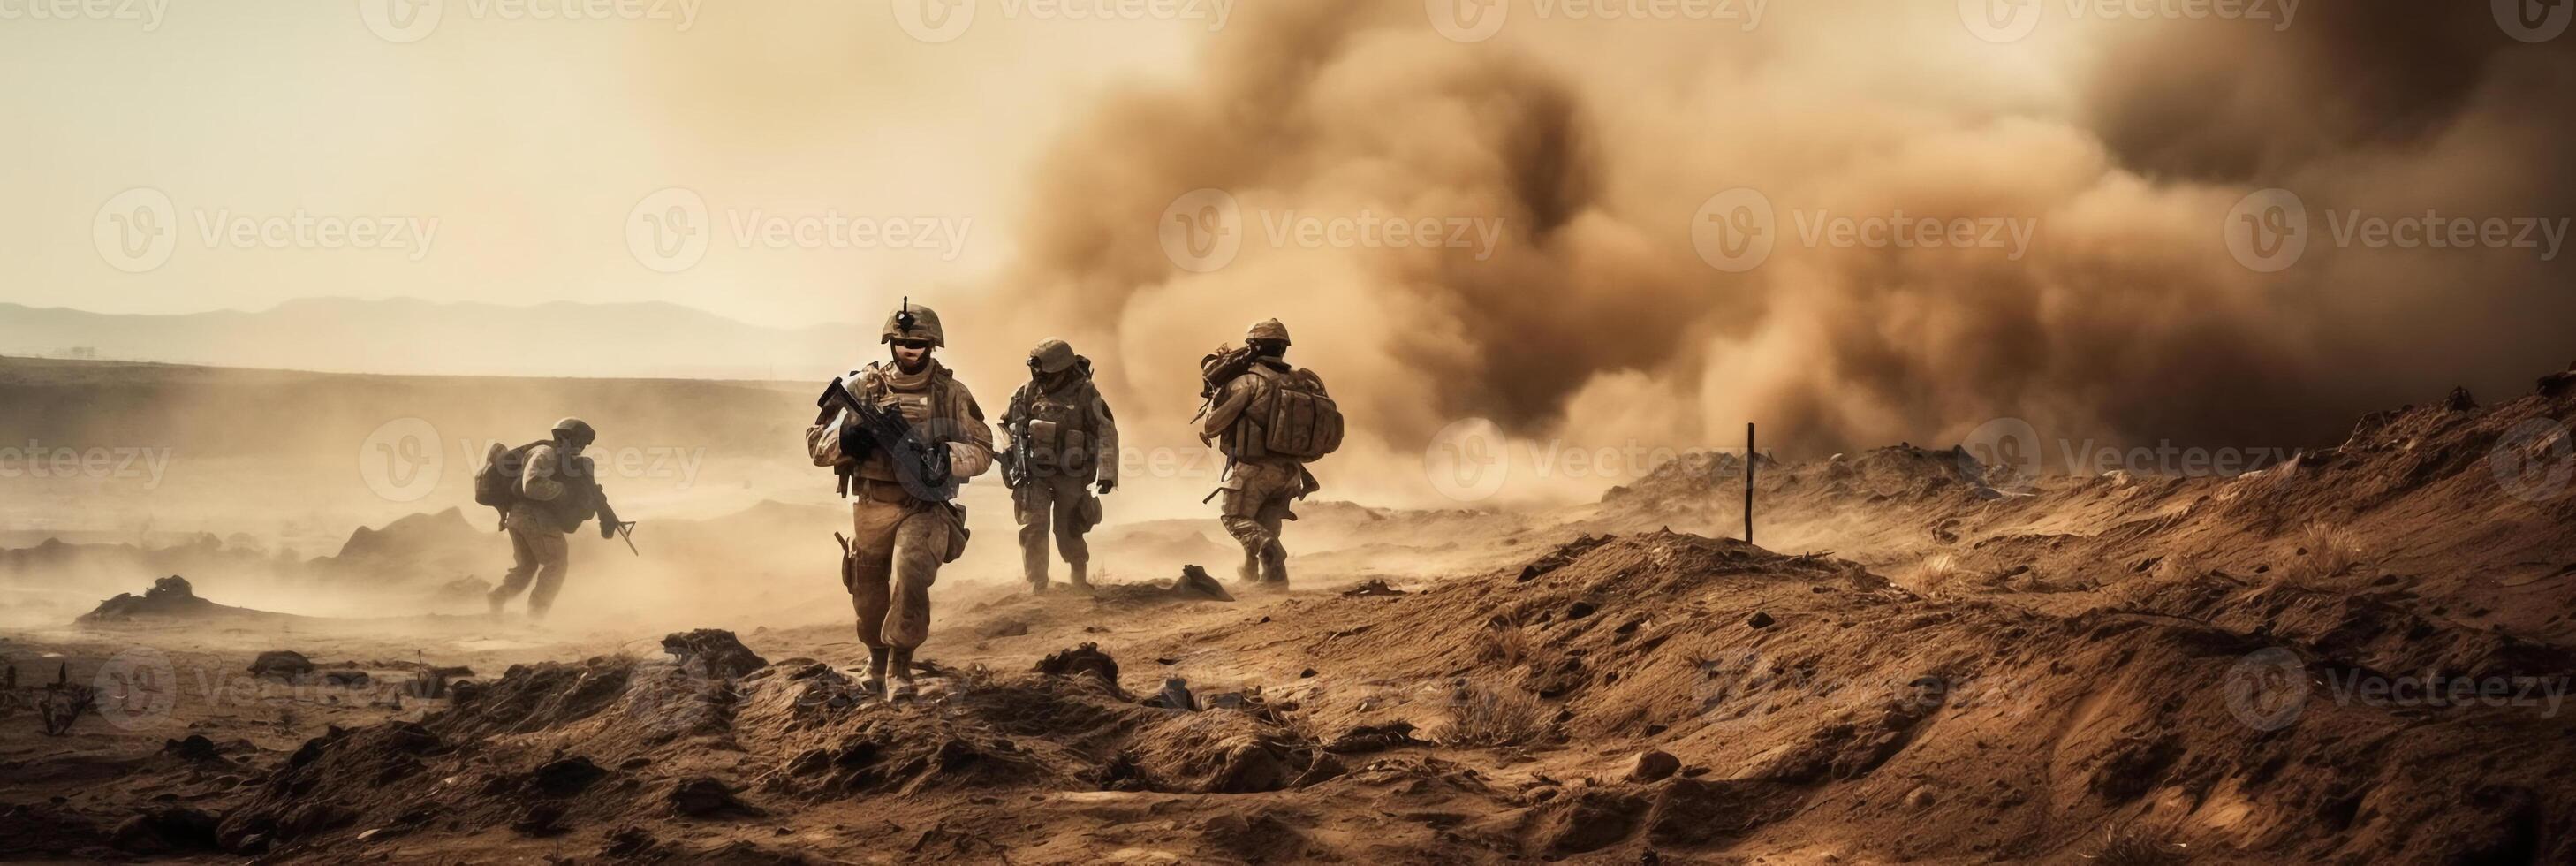 Military special forces soldiers crosses destroyed warzone through fire and smoke in the desert, photo